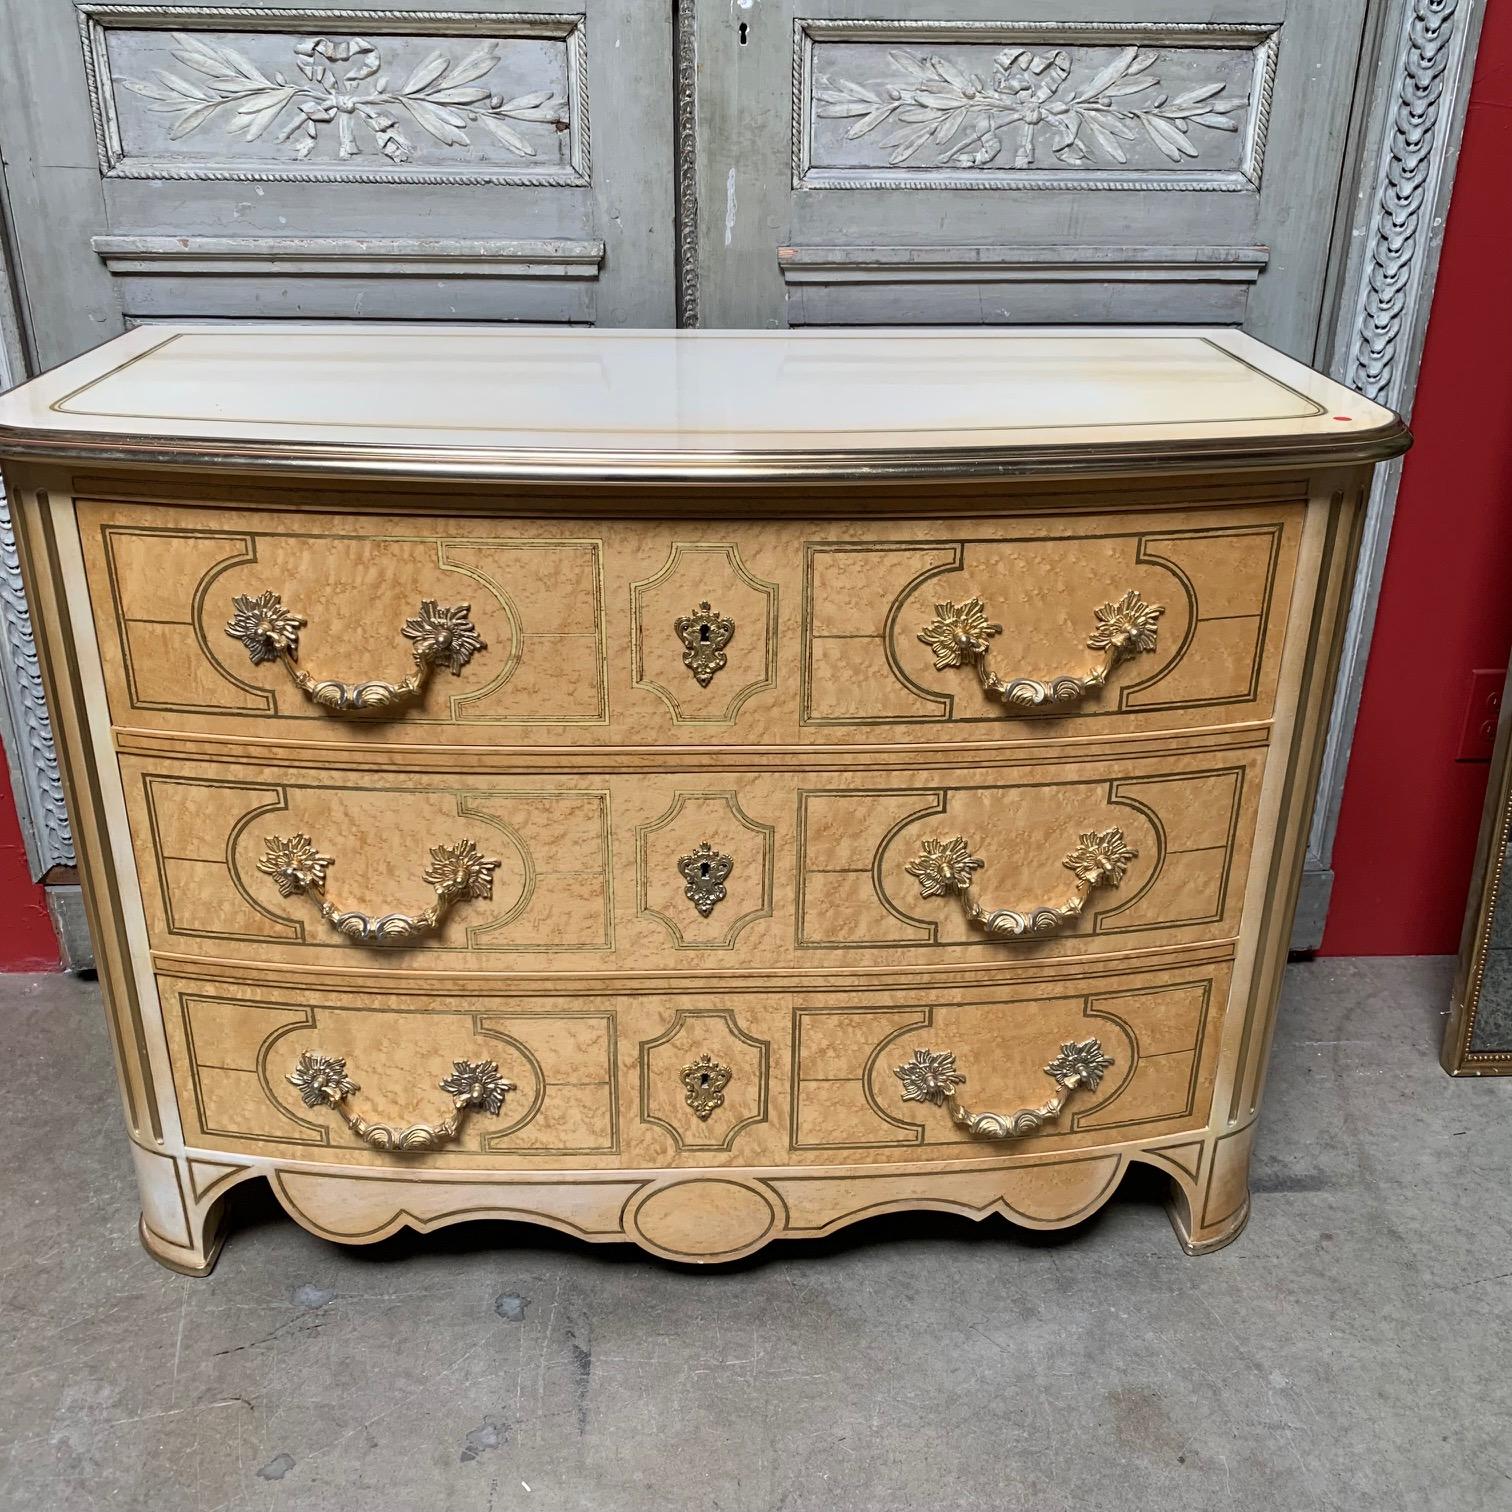 A French Regence style commode in mable and lacquer with inlayed brass and bronze dore hardware. This chest of drawers is by Maison Romeo and dates from the early 1980s. It is beautifully made and in nice condition.